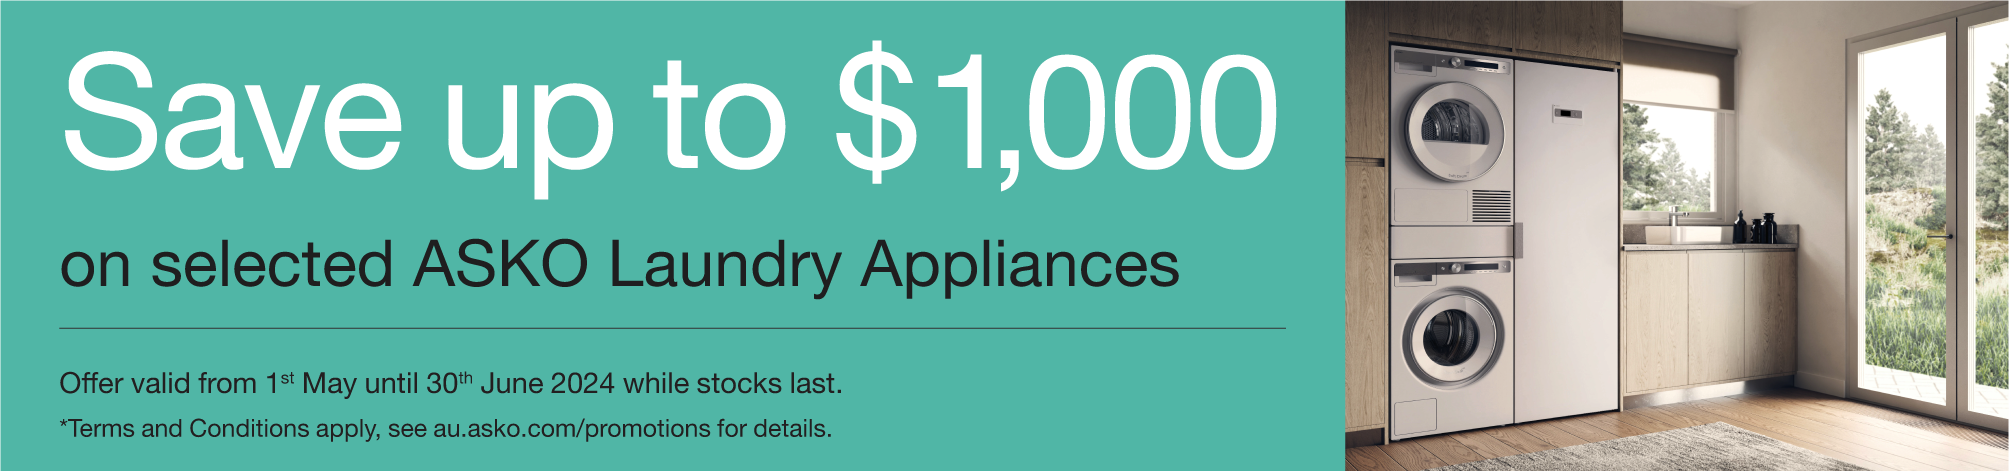 Save Up To $1,000 On Selected ASKO Laundry Appliances